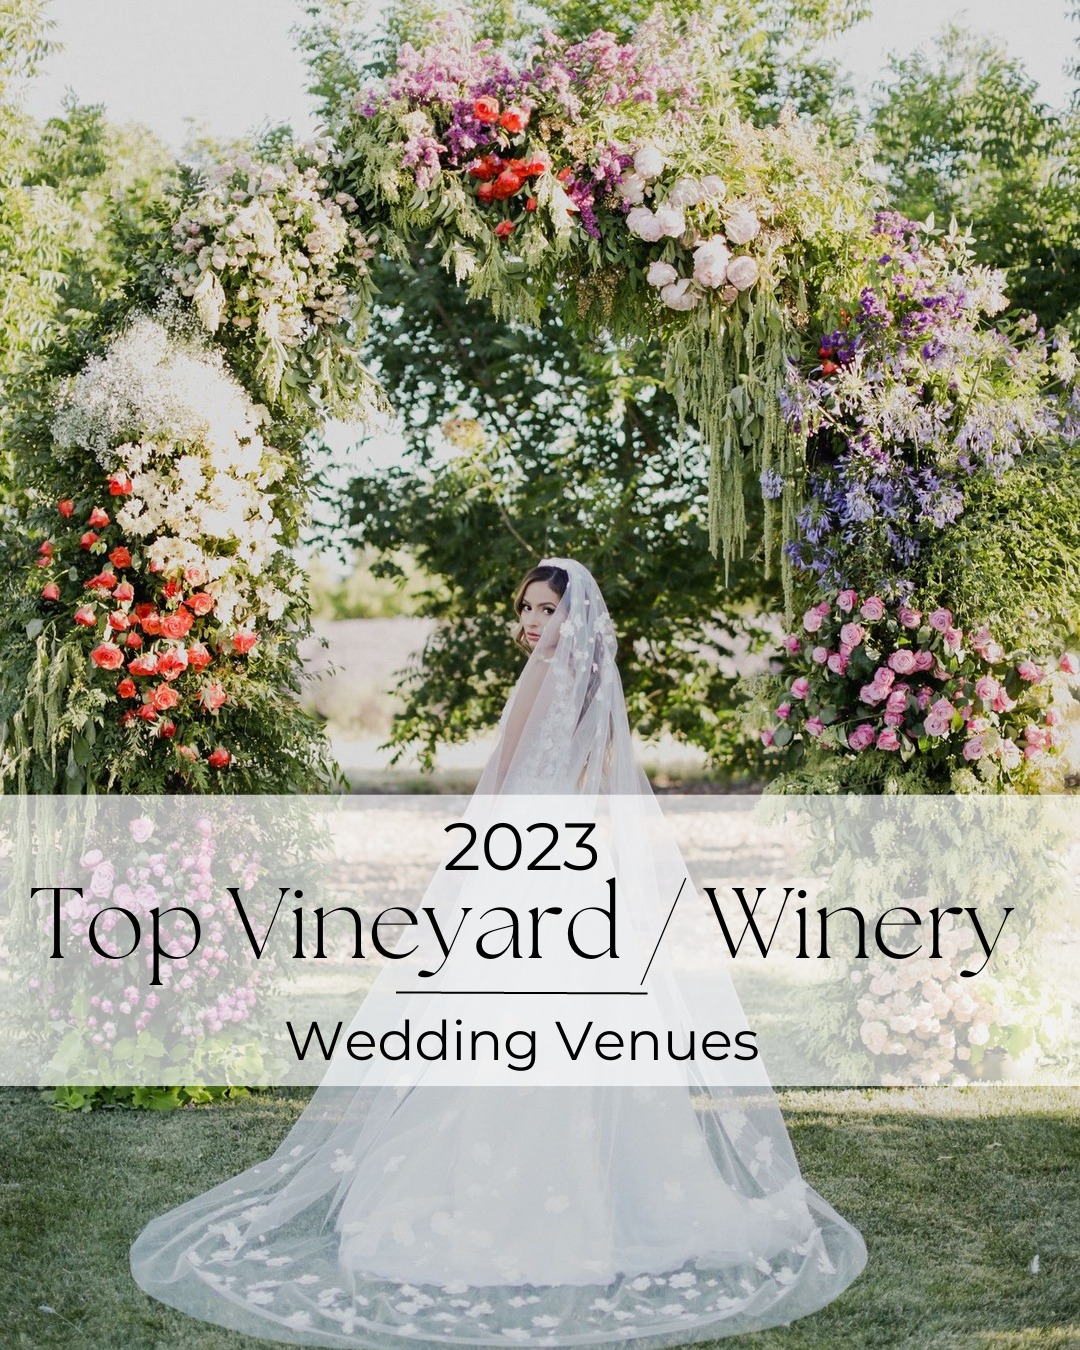 Vineyard wedding anyone" Here are a few that you should know about?